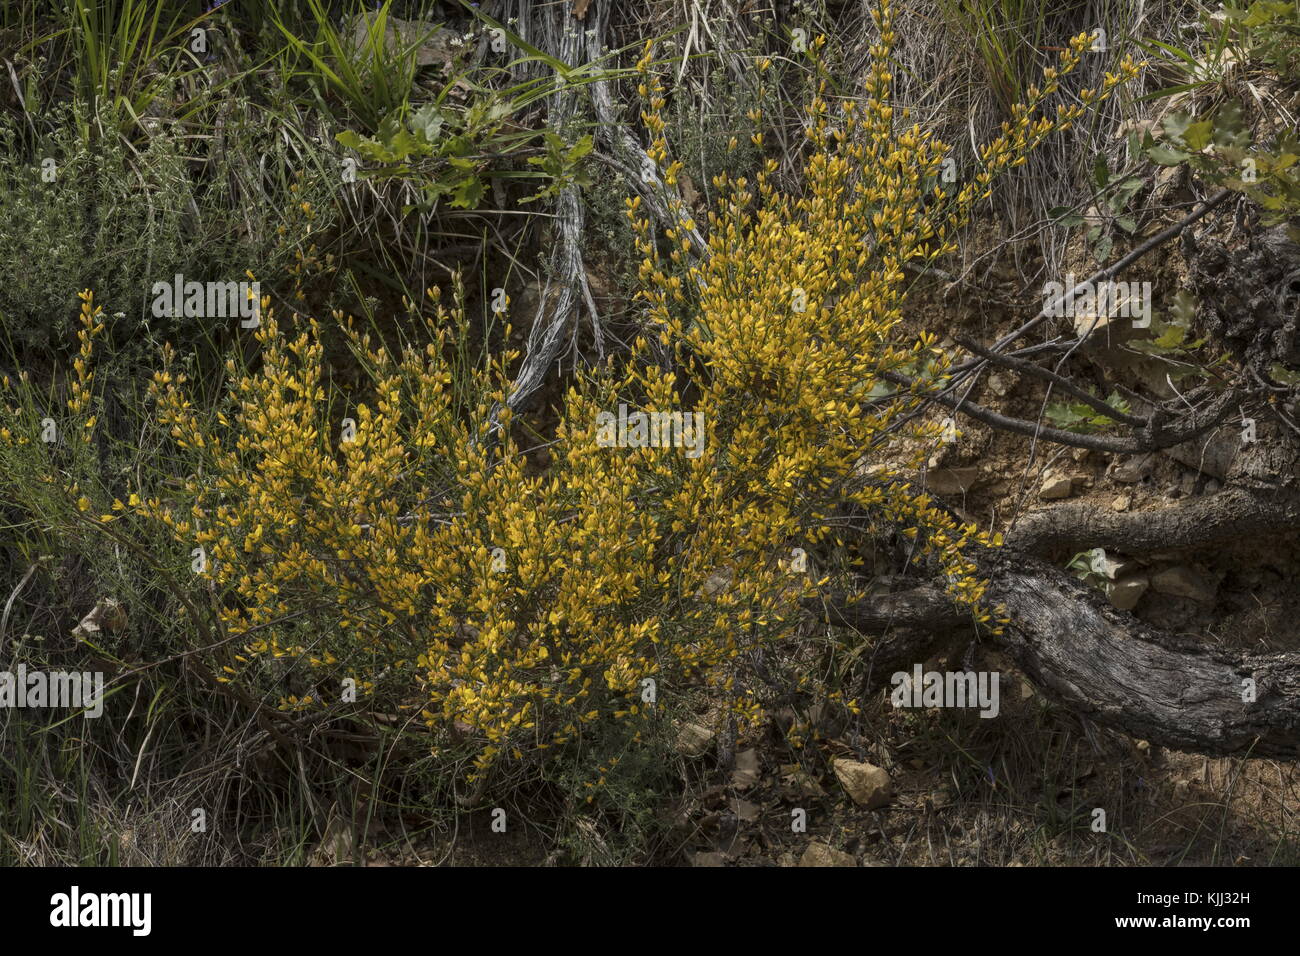 A dwarf broom, Genista cinerea in flower in the Maritime Alps, France. Stock Photo